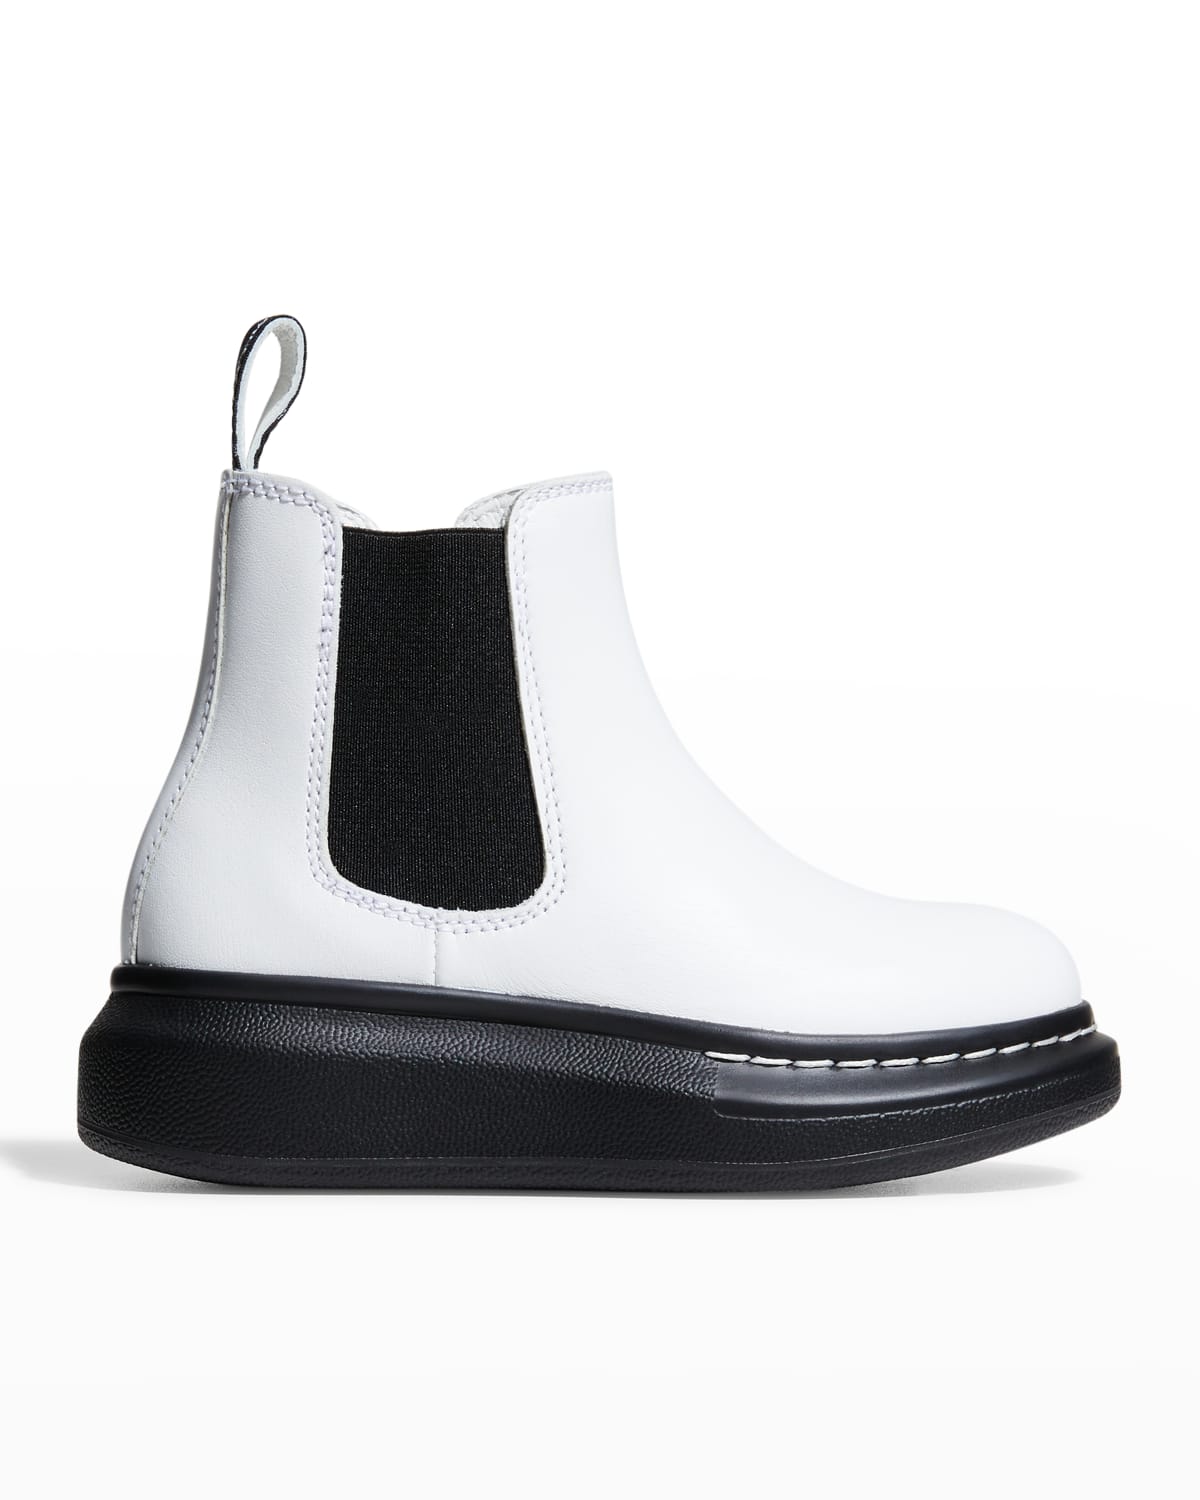 Kid's Bicolor Leather Chelsea Boots, Toddler/Kids